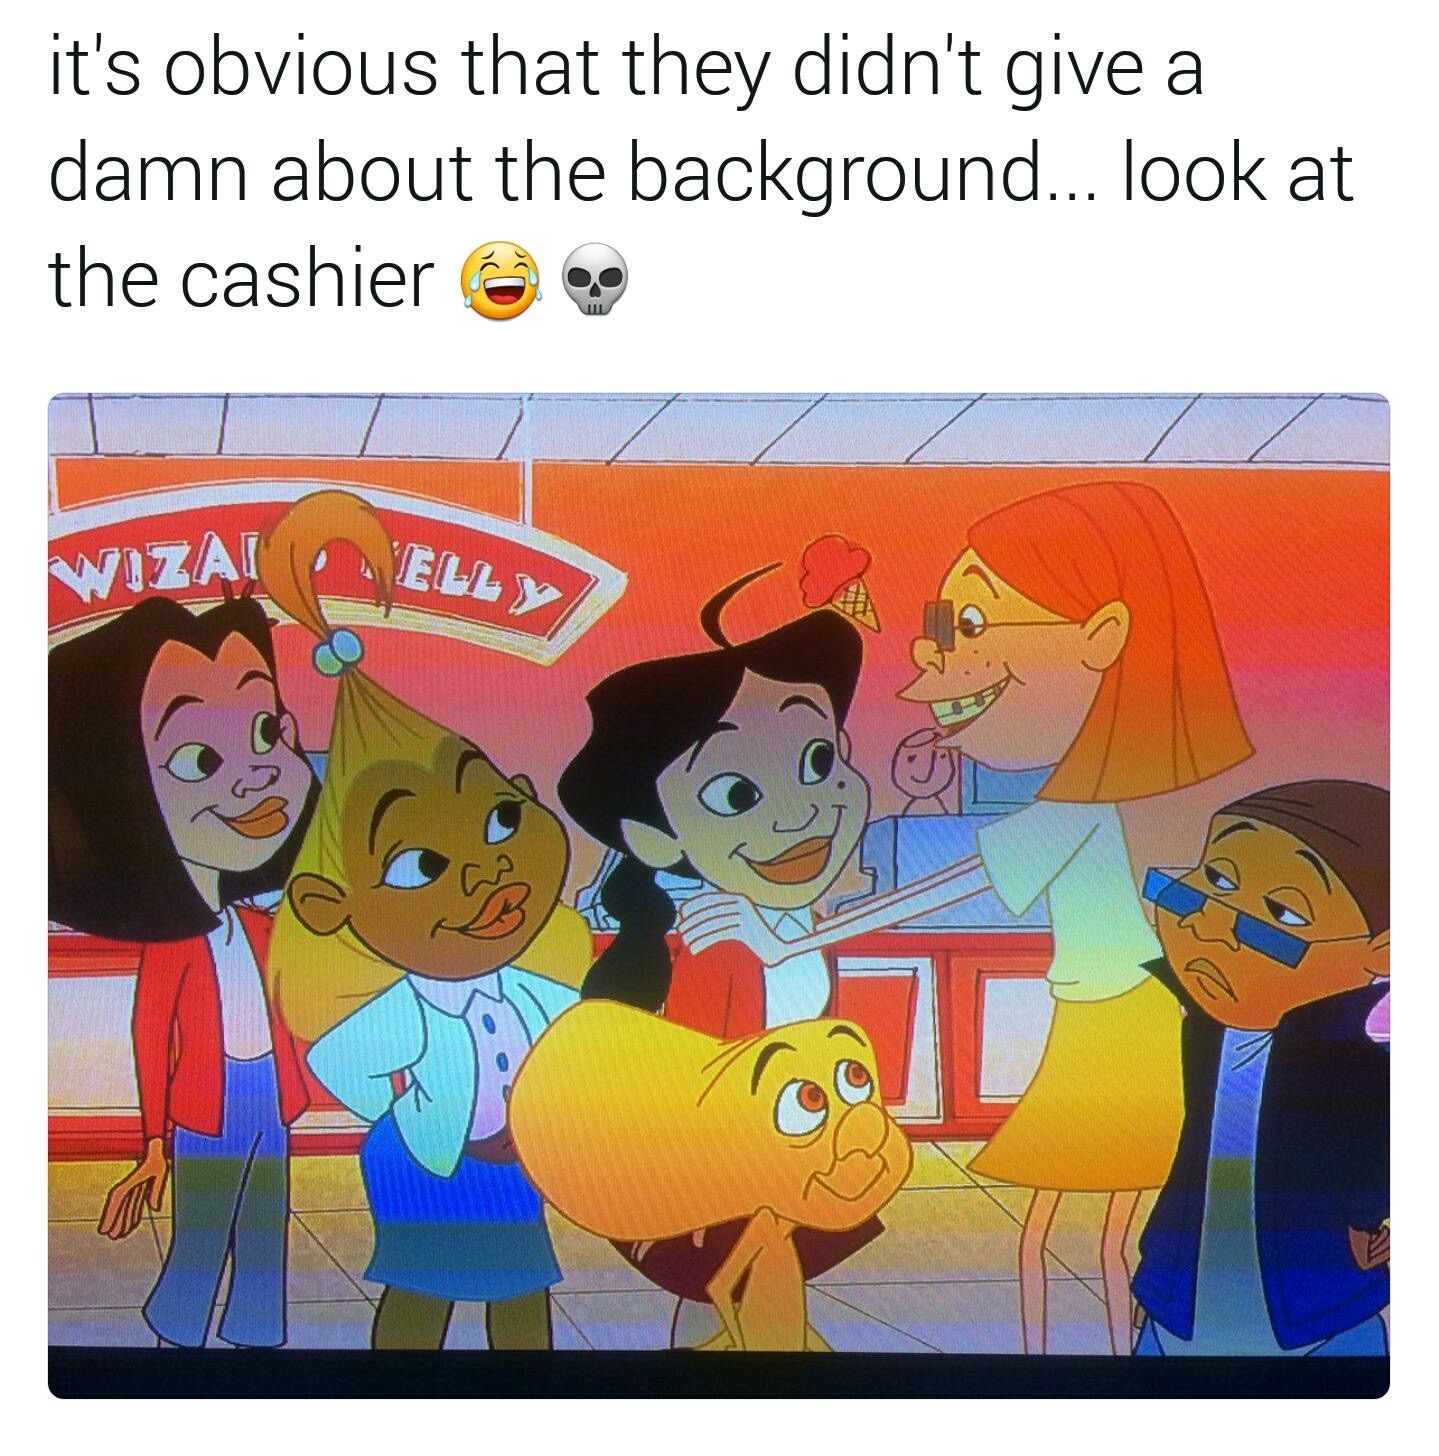 funny cartoon characters memes - it's obvious that they didn't give a damn about the background... look at the cashier Enza Avell